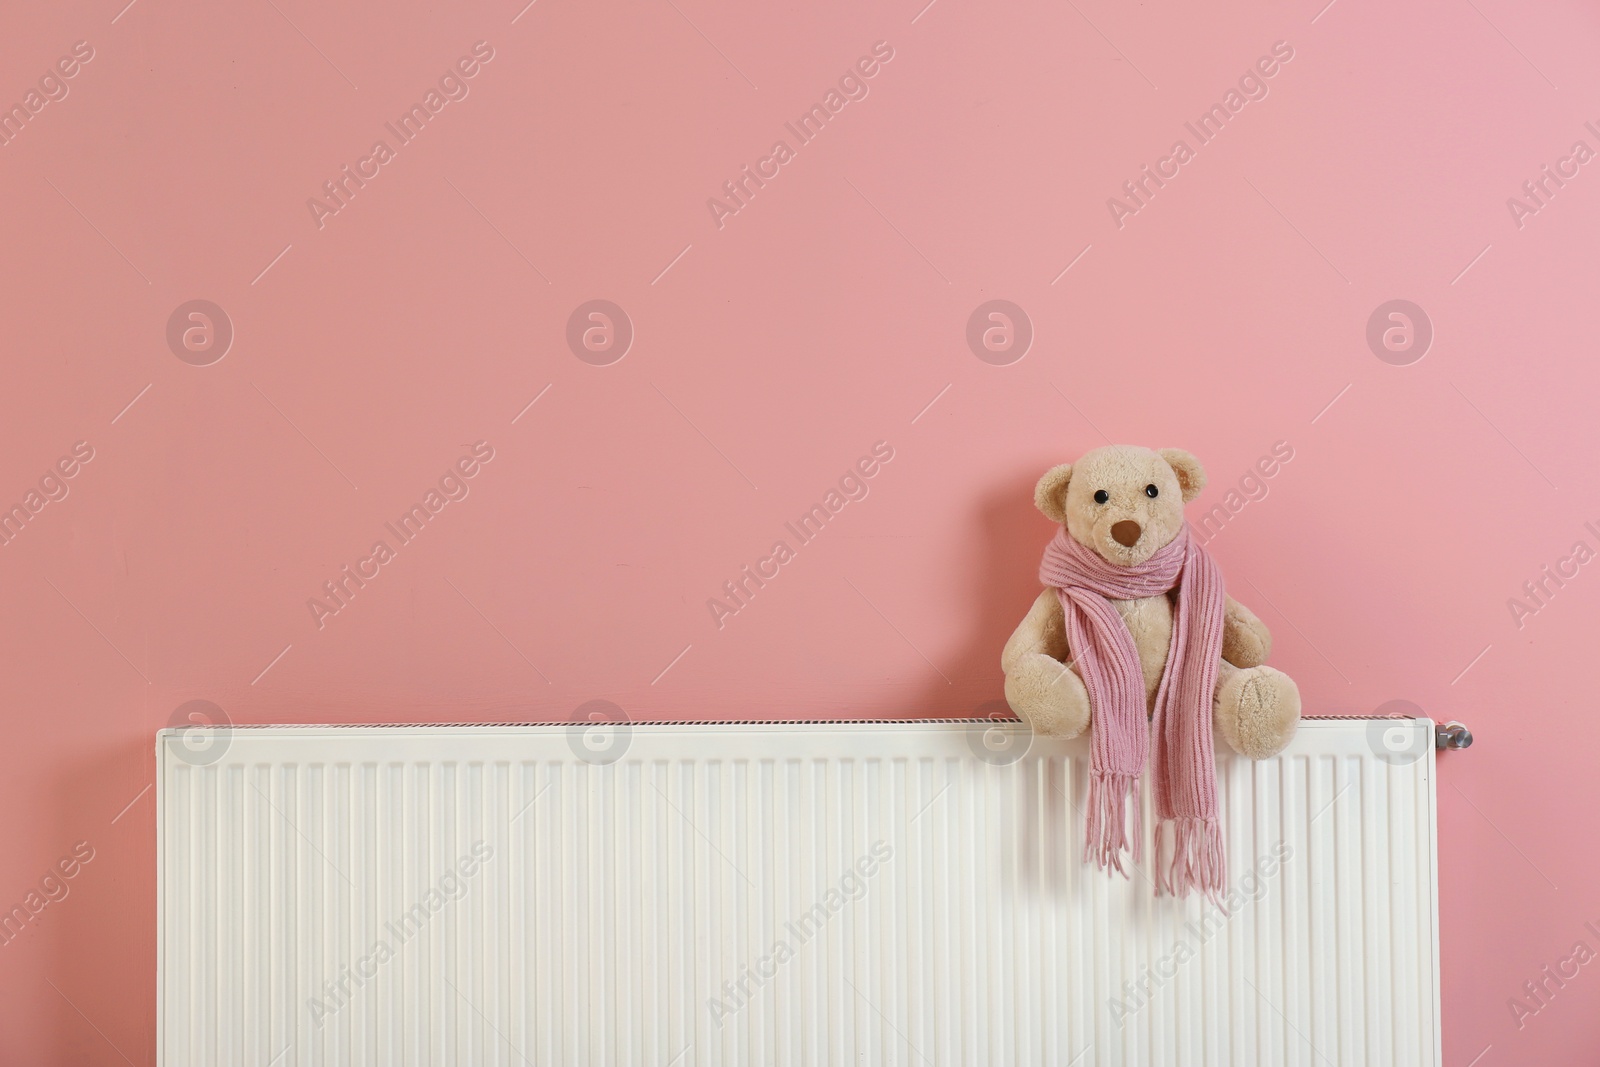 Photo of Teddy bear with knitted scarf on heating radiator near color wall. Space for text